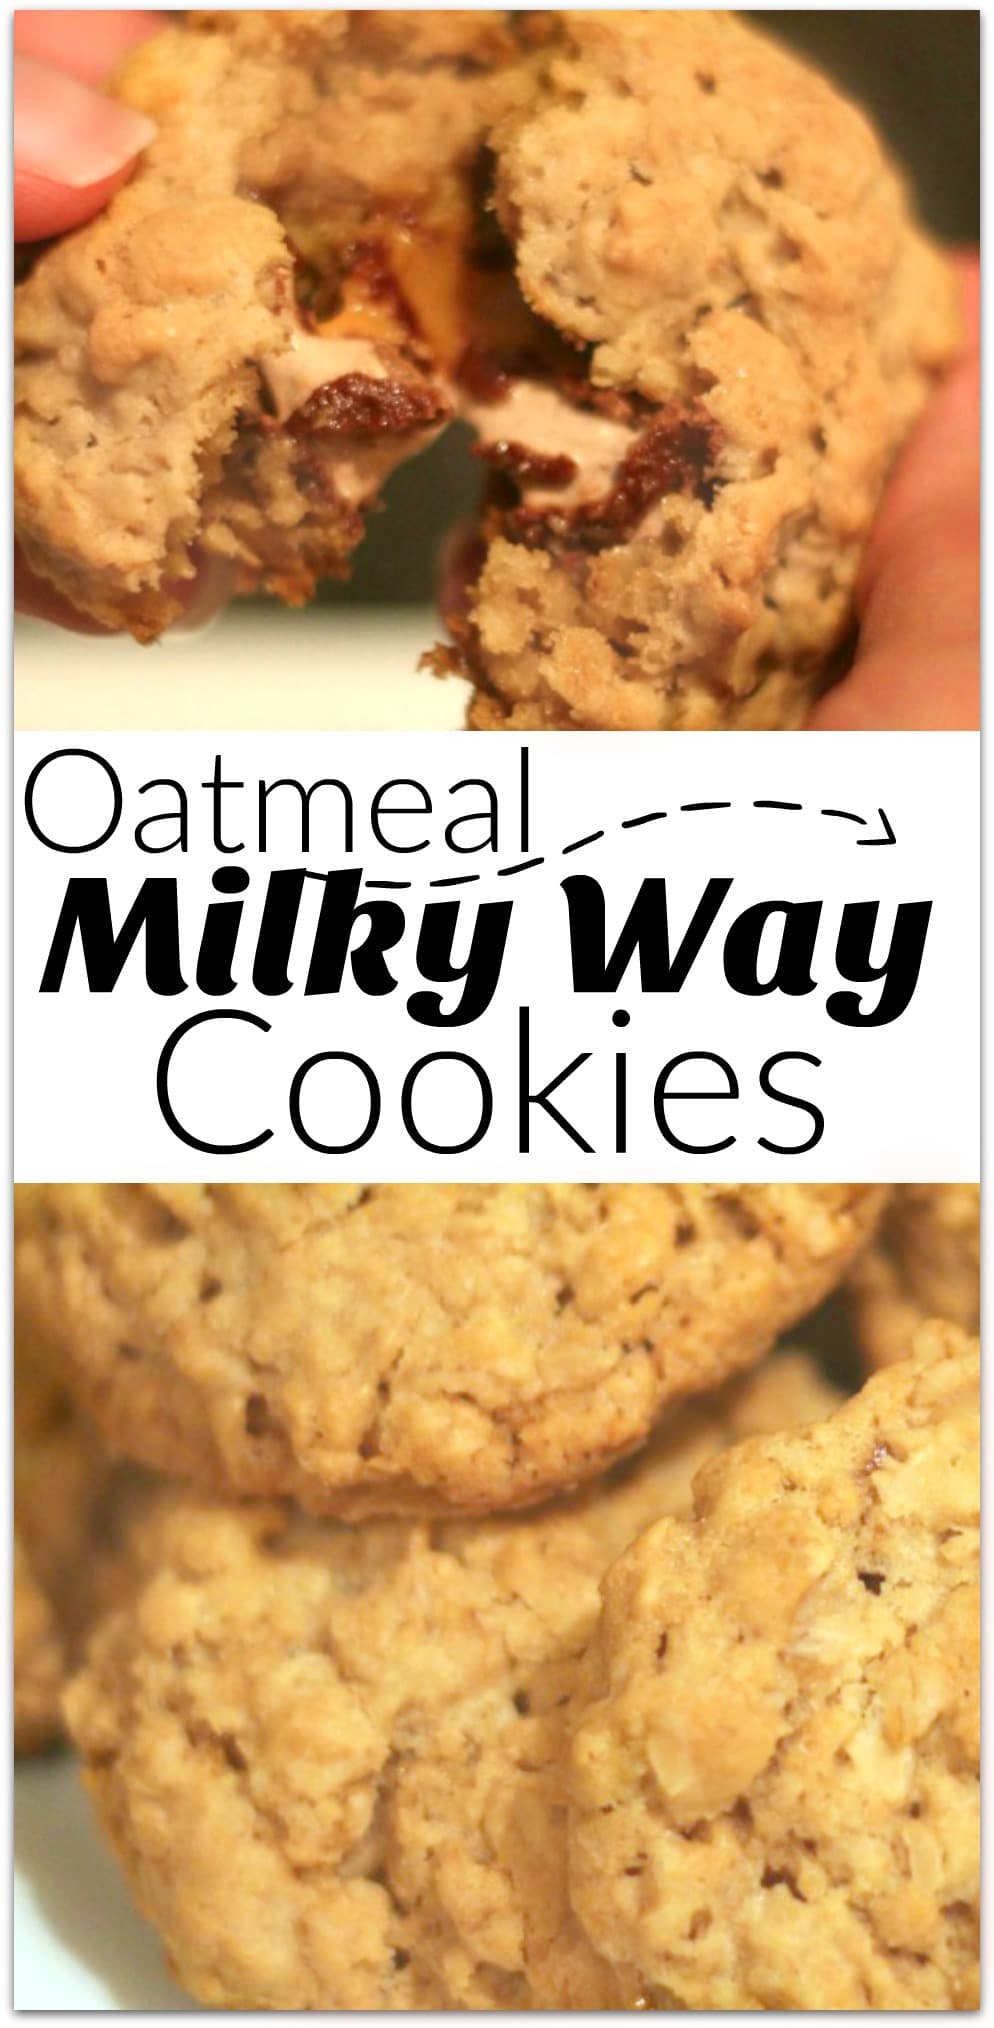 These oatmeal milky way cookies are unbelievable scrumptious! With a slightly crisp outside and delicious gooey inside, this will be your Game Day dessert!